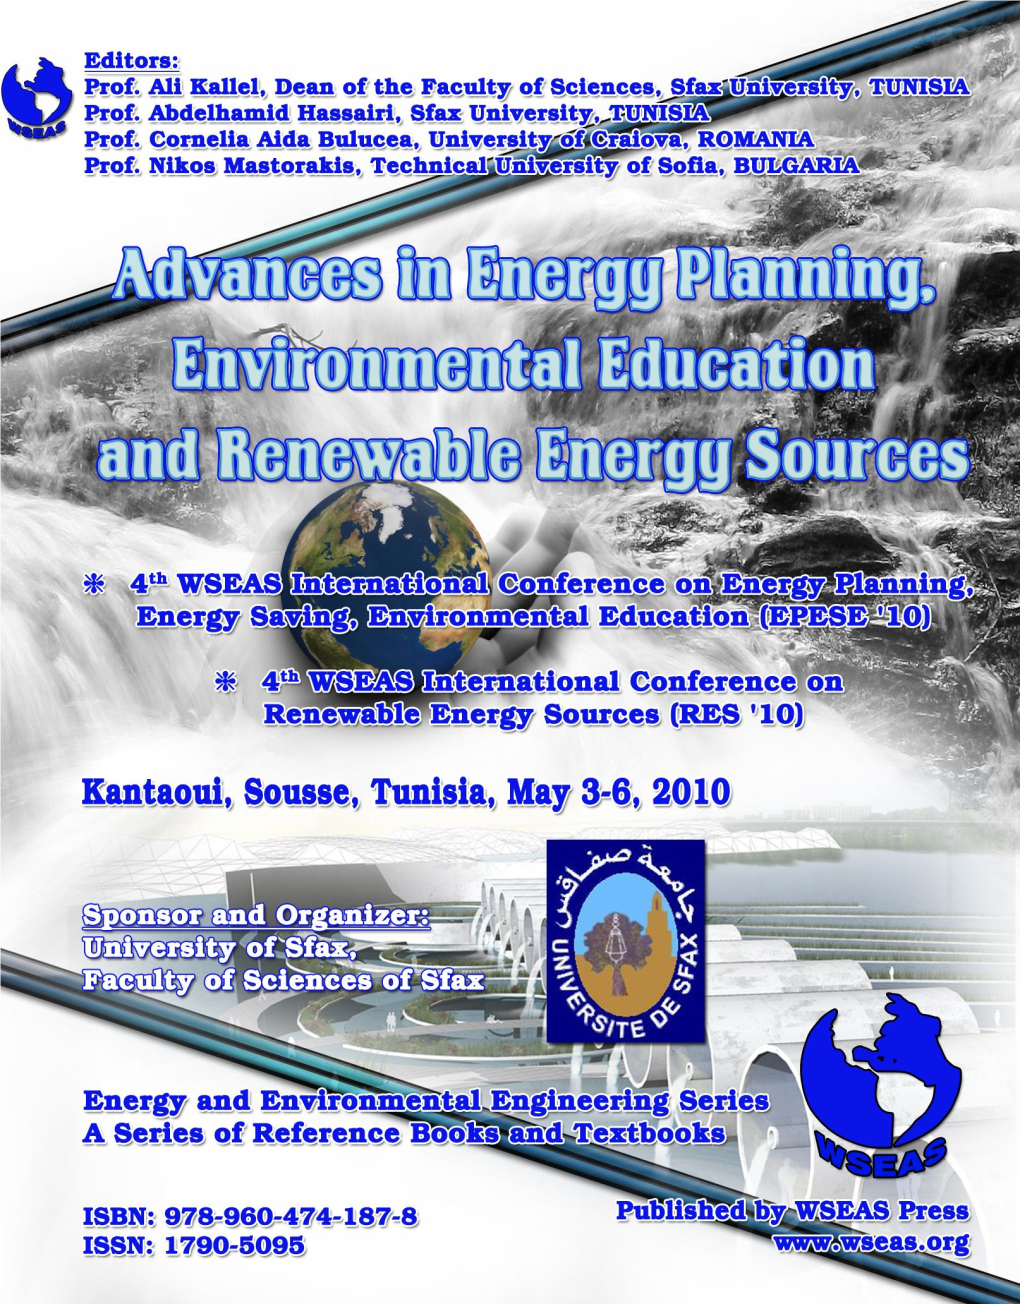 4Th WSEAS International Conference on RENEWABLE ENERGY SOURCES (RES '10)